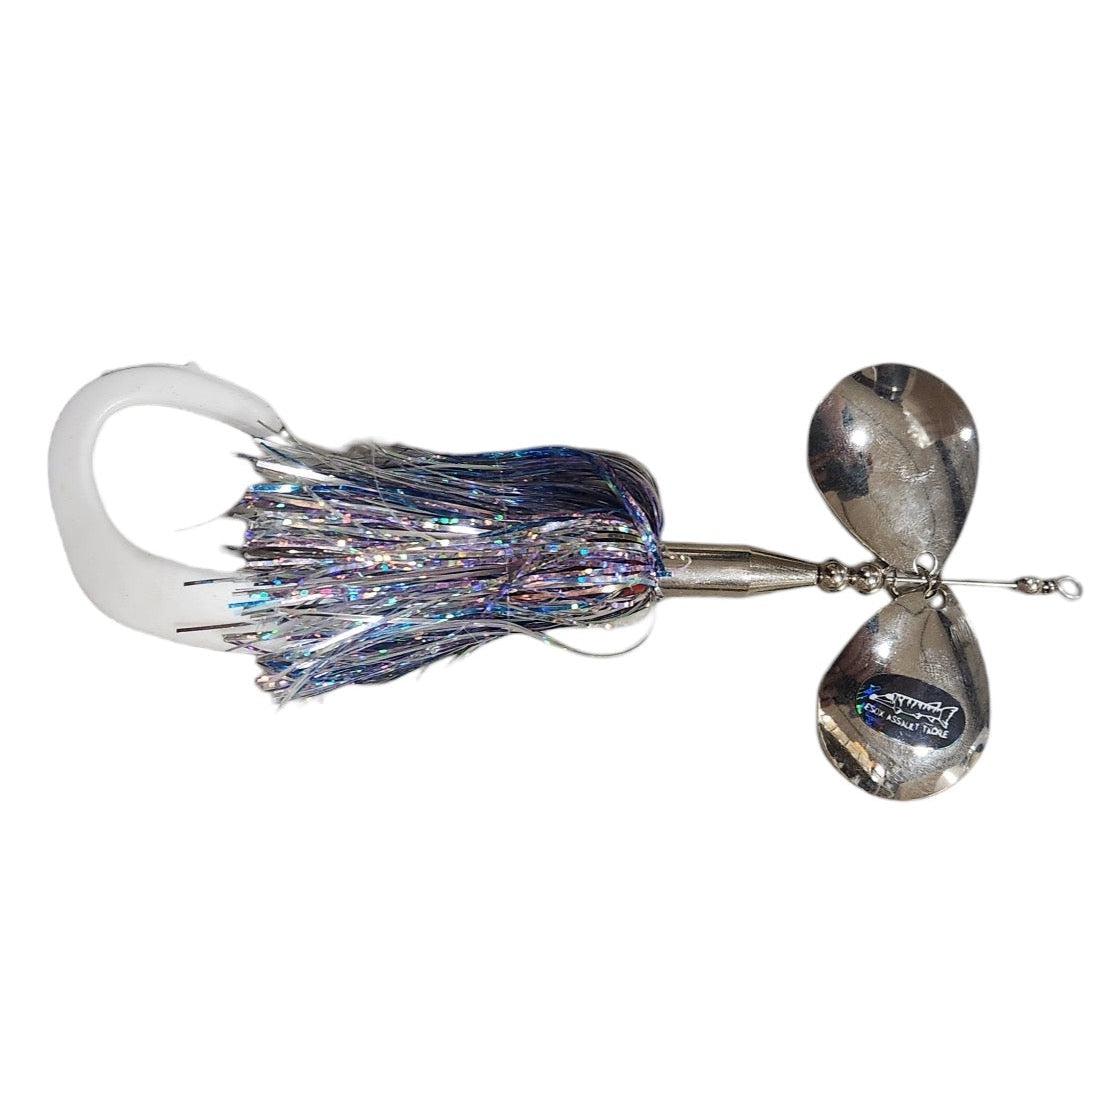 View of Bucktails Esox Assault Double 6 Bucktail Shimmer Shad available at EZOKO Pike and Musky Shop